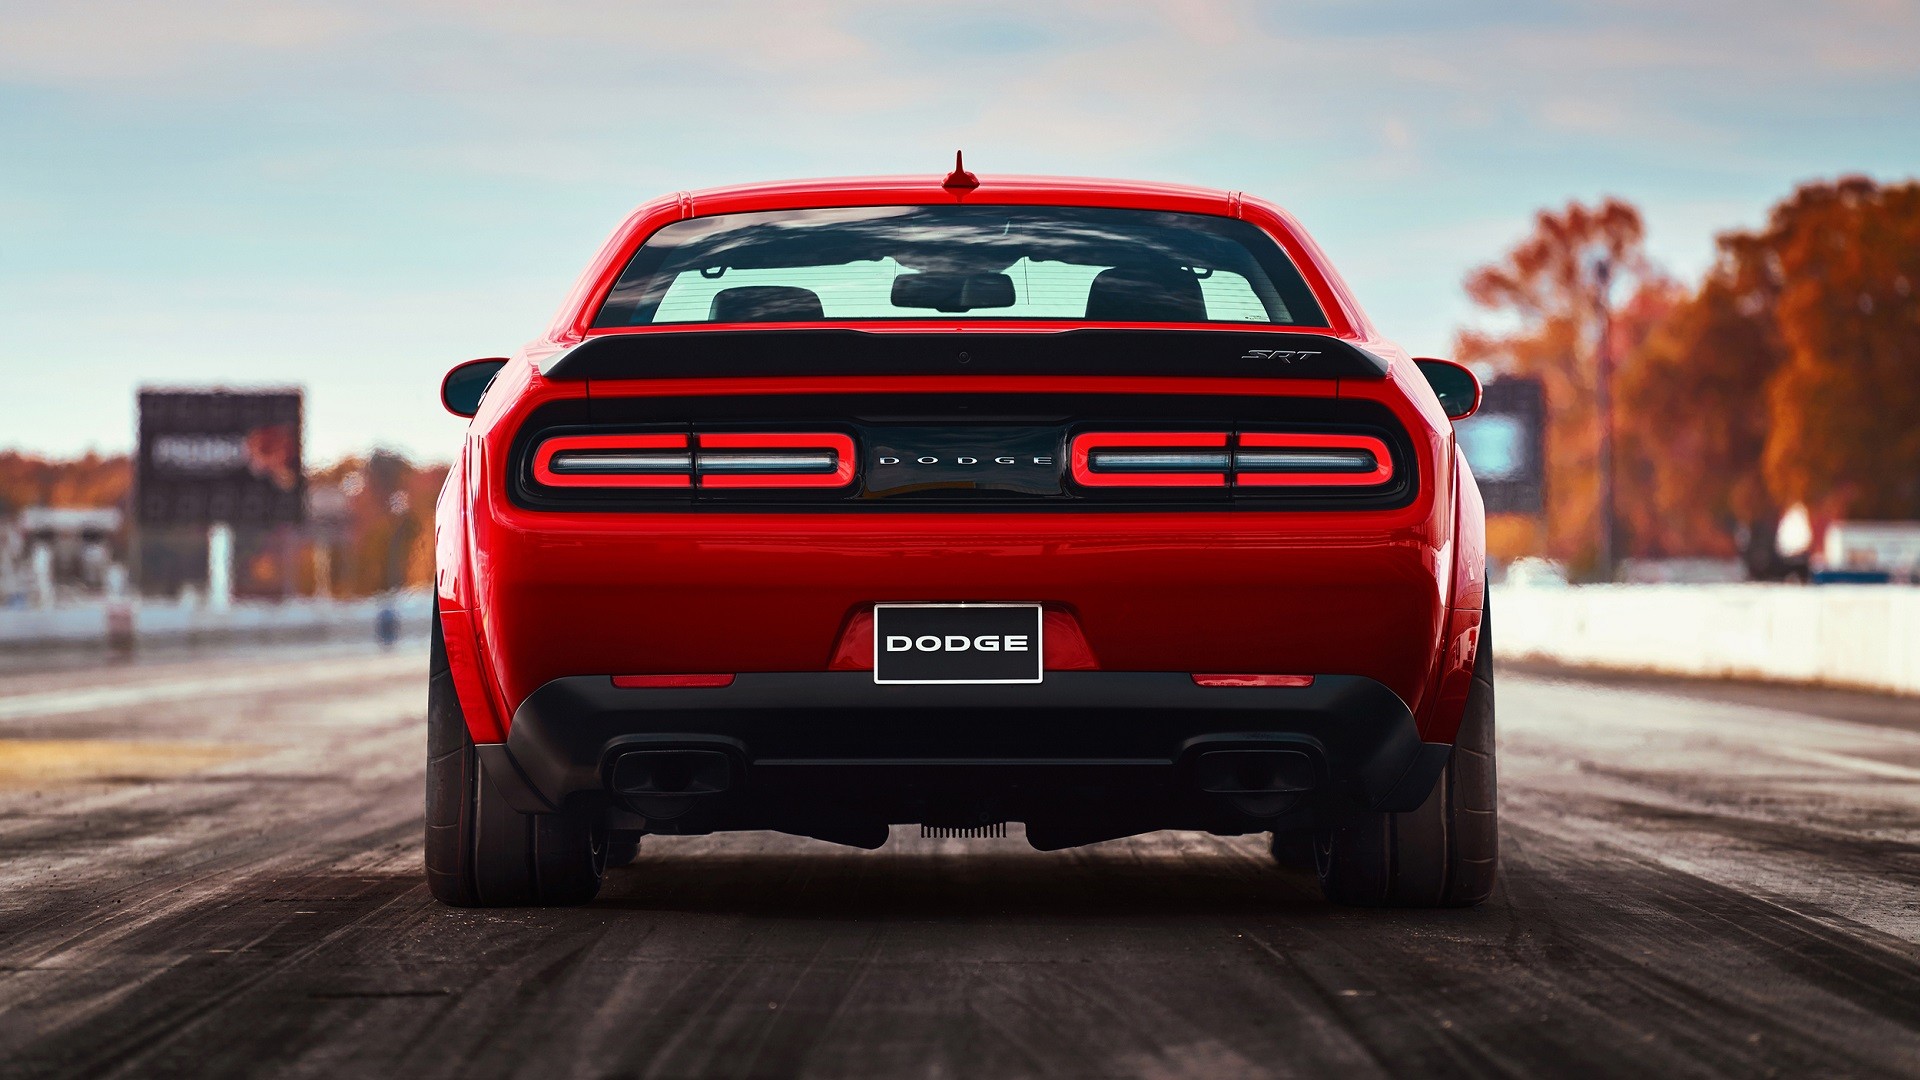 General 1920x1080 Dodge Challenger Dodge car red cars red rear view muscle cars American cars Stellantis